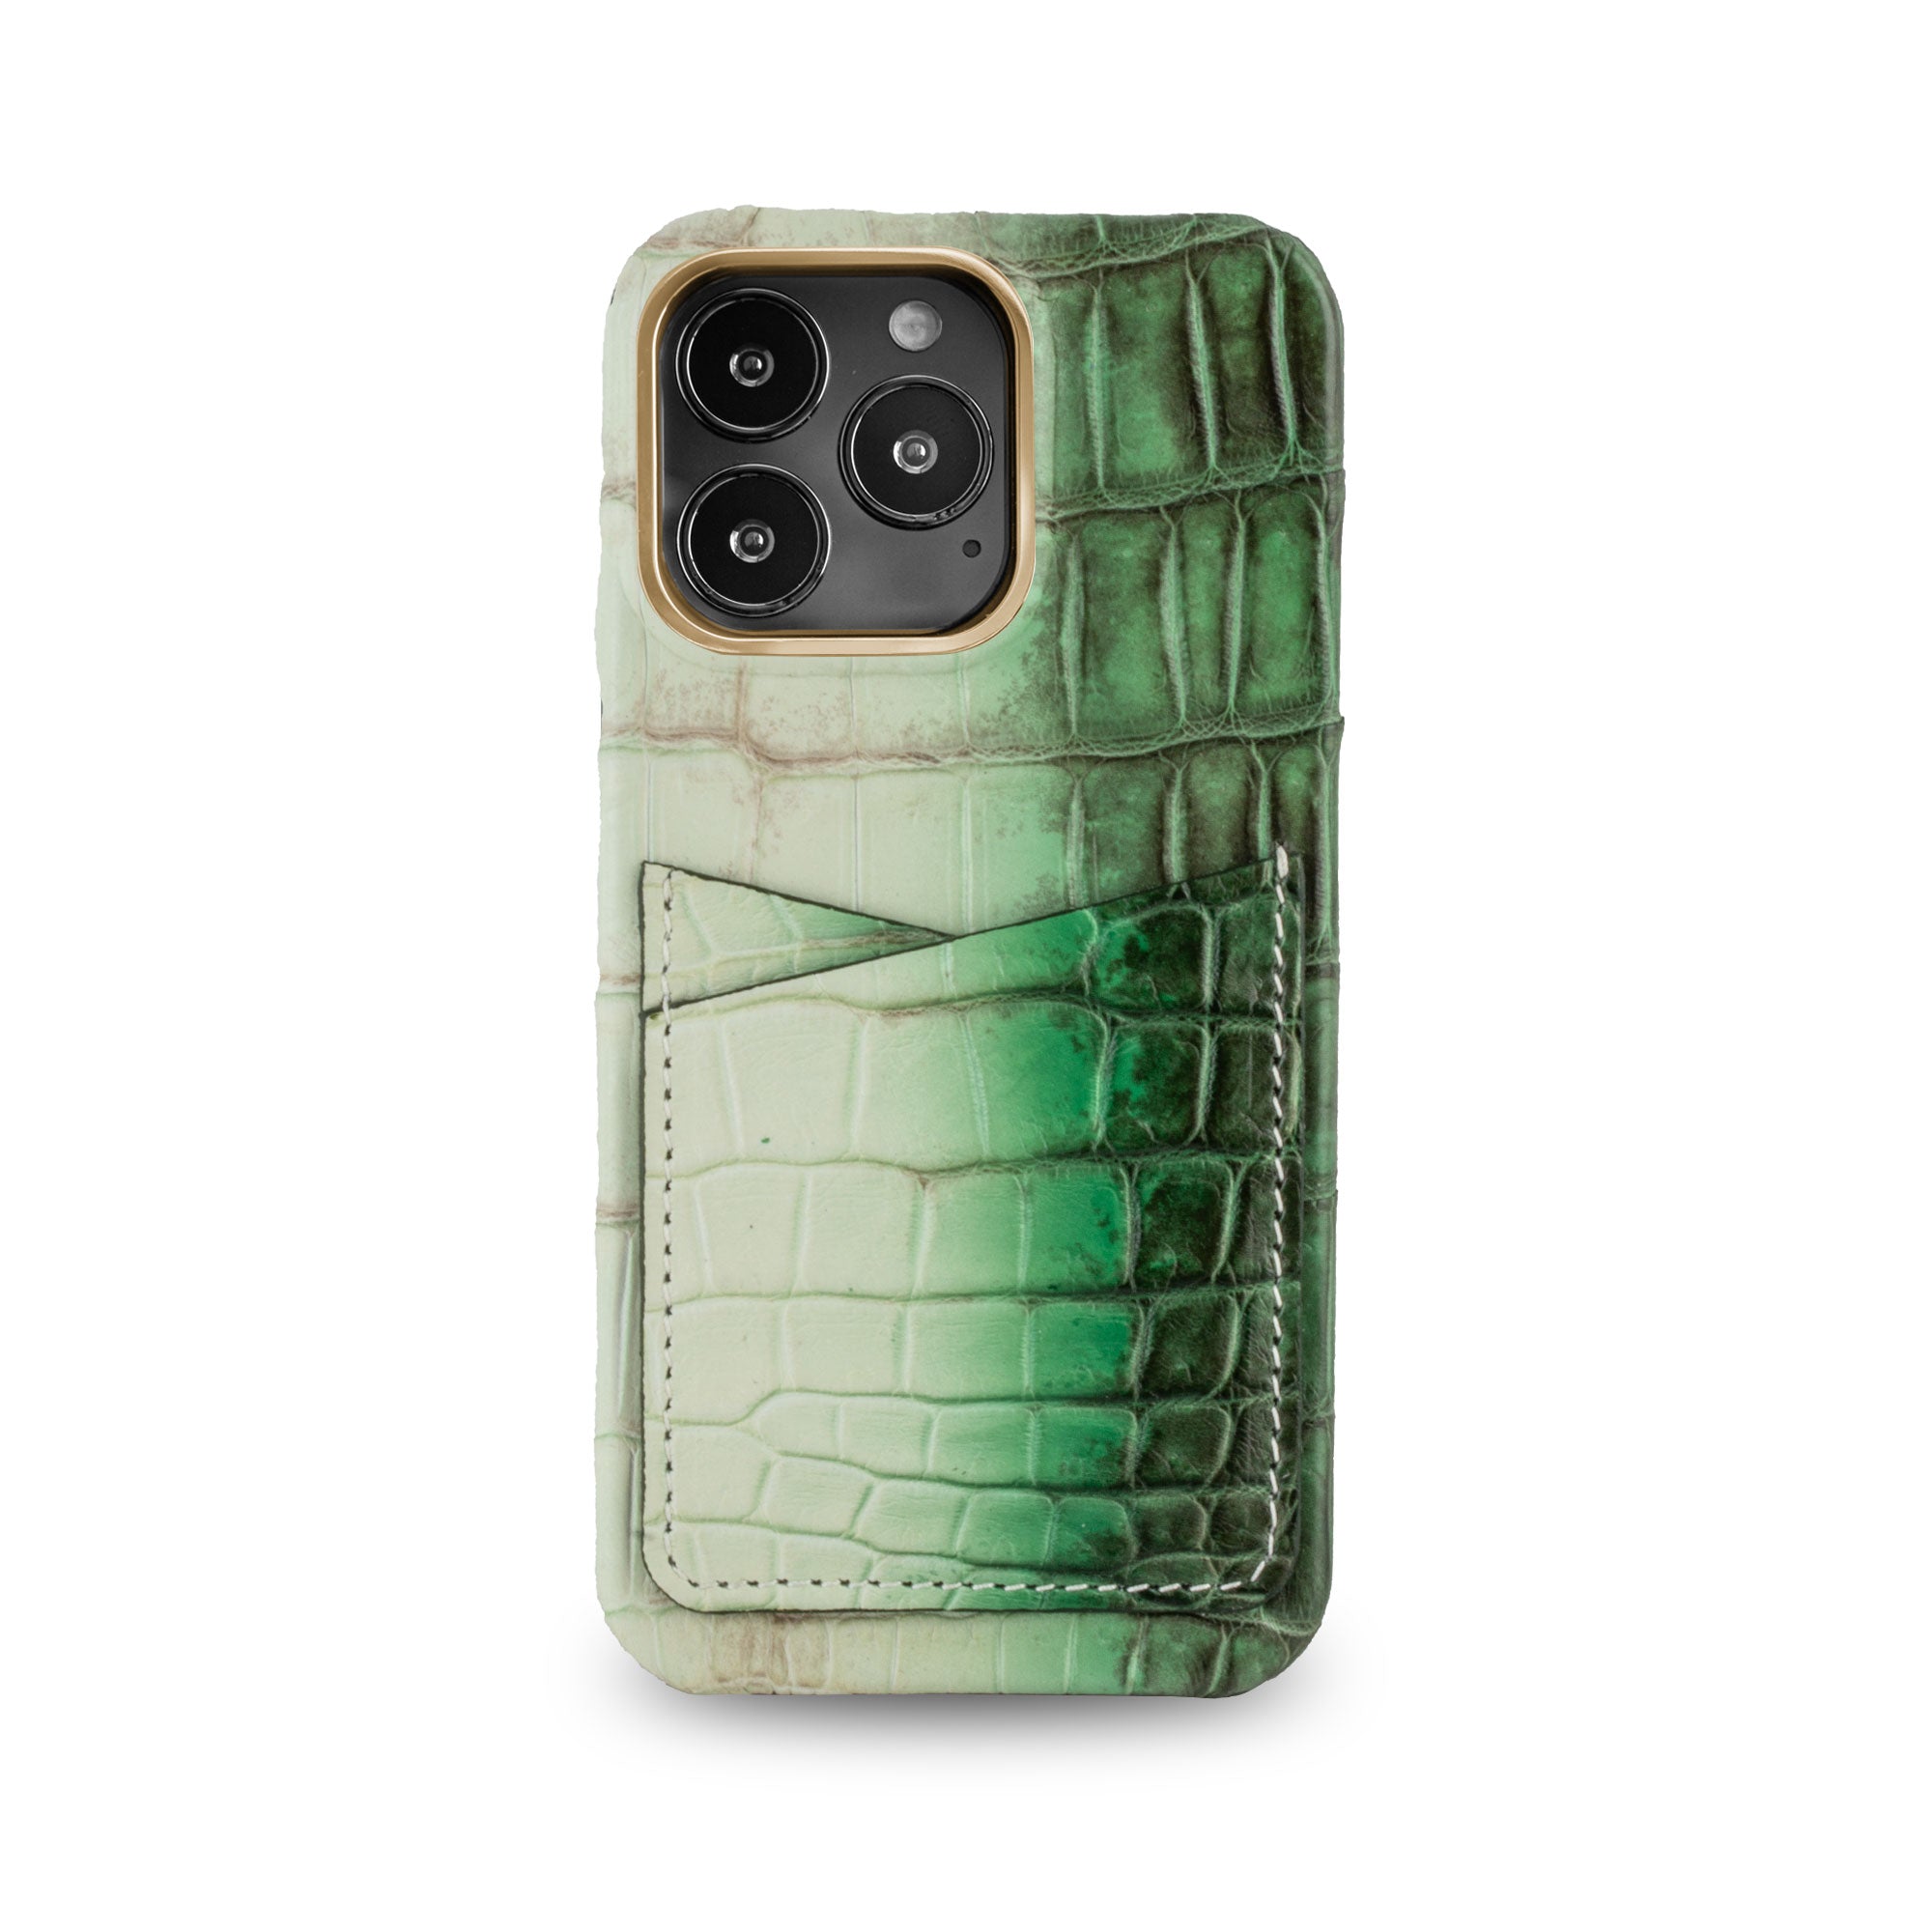 Leather iPhone HIMALAYA "Card case" / cover - iPhone 13 ( Pro / Max ) - Genuine alligator